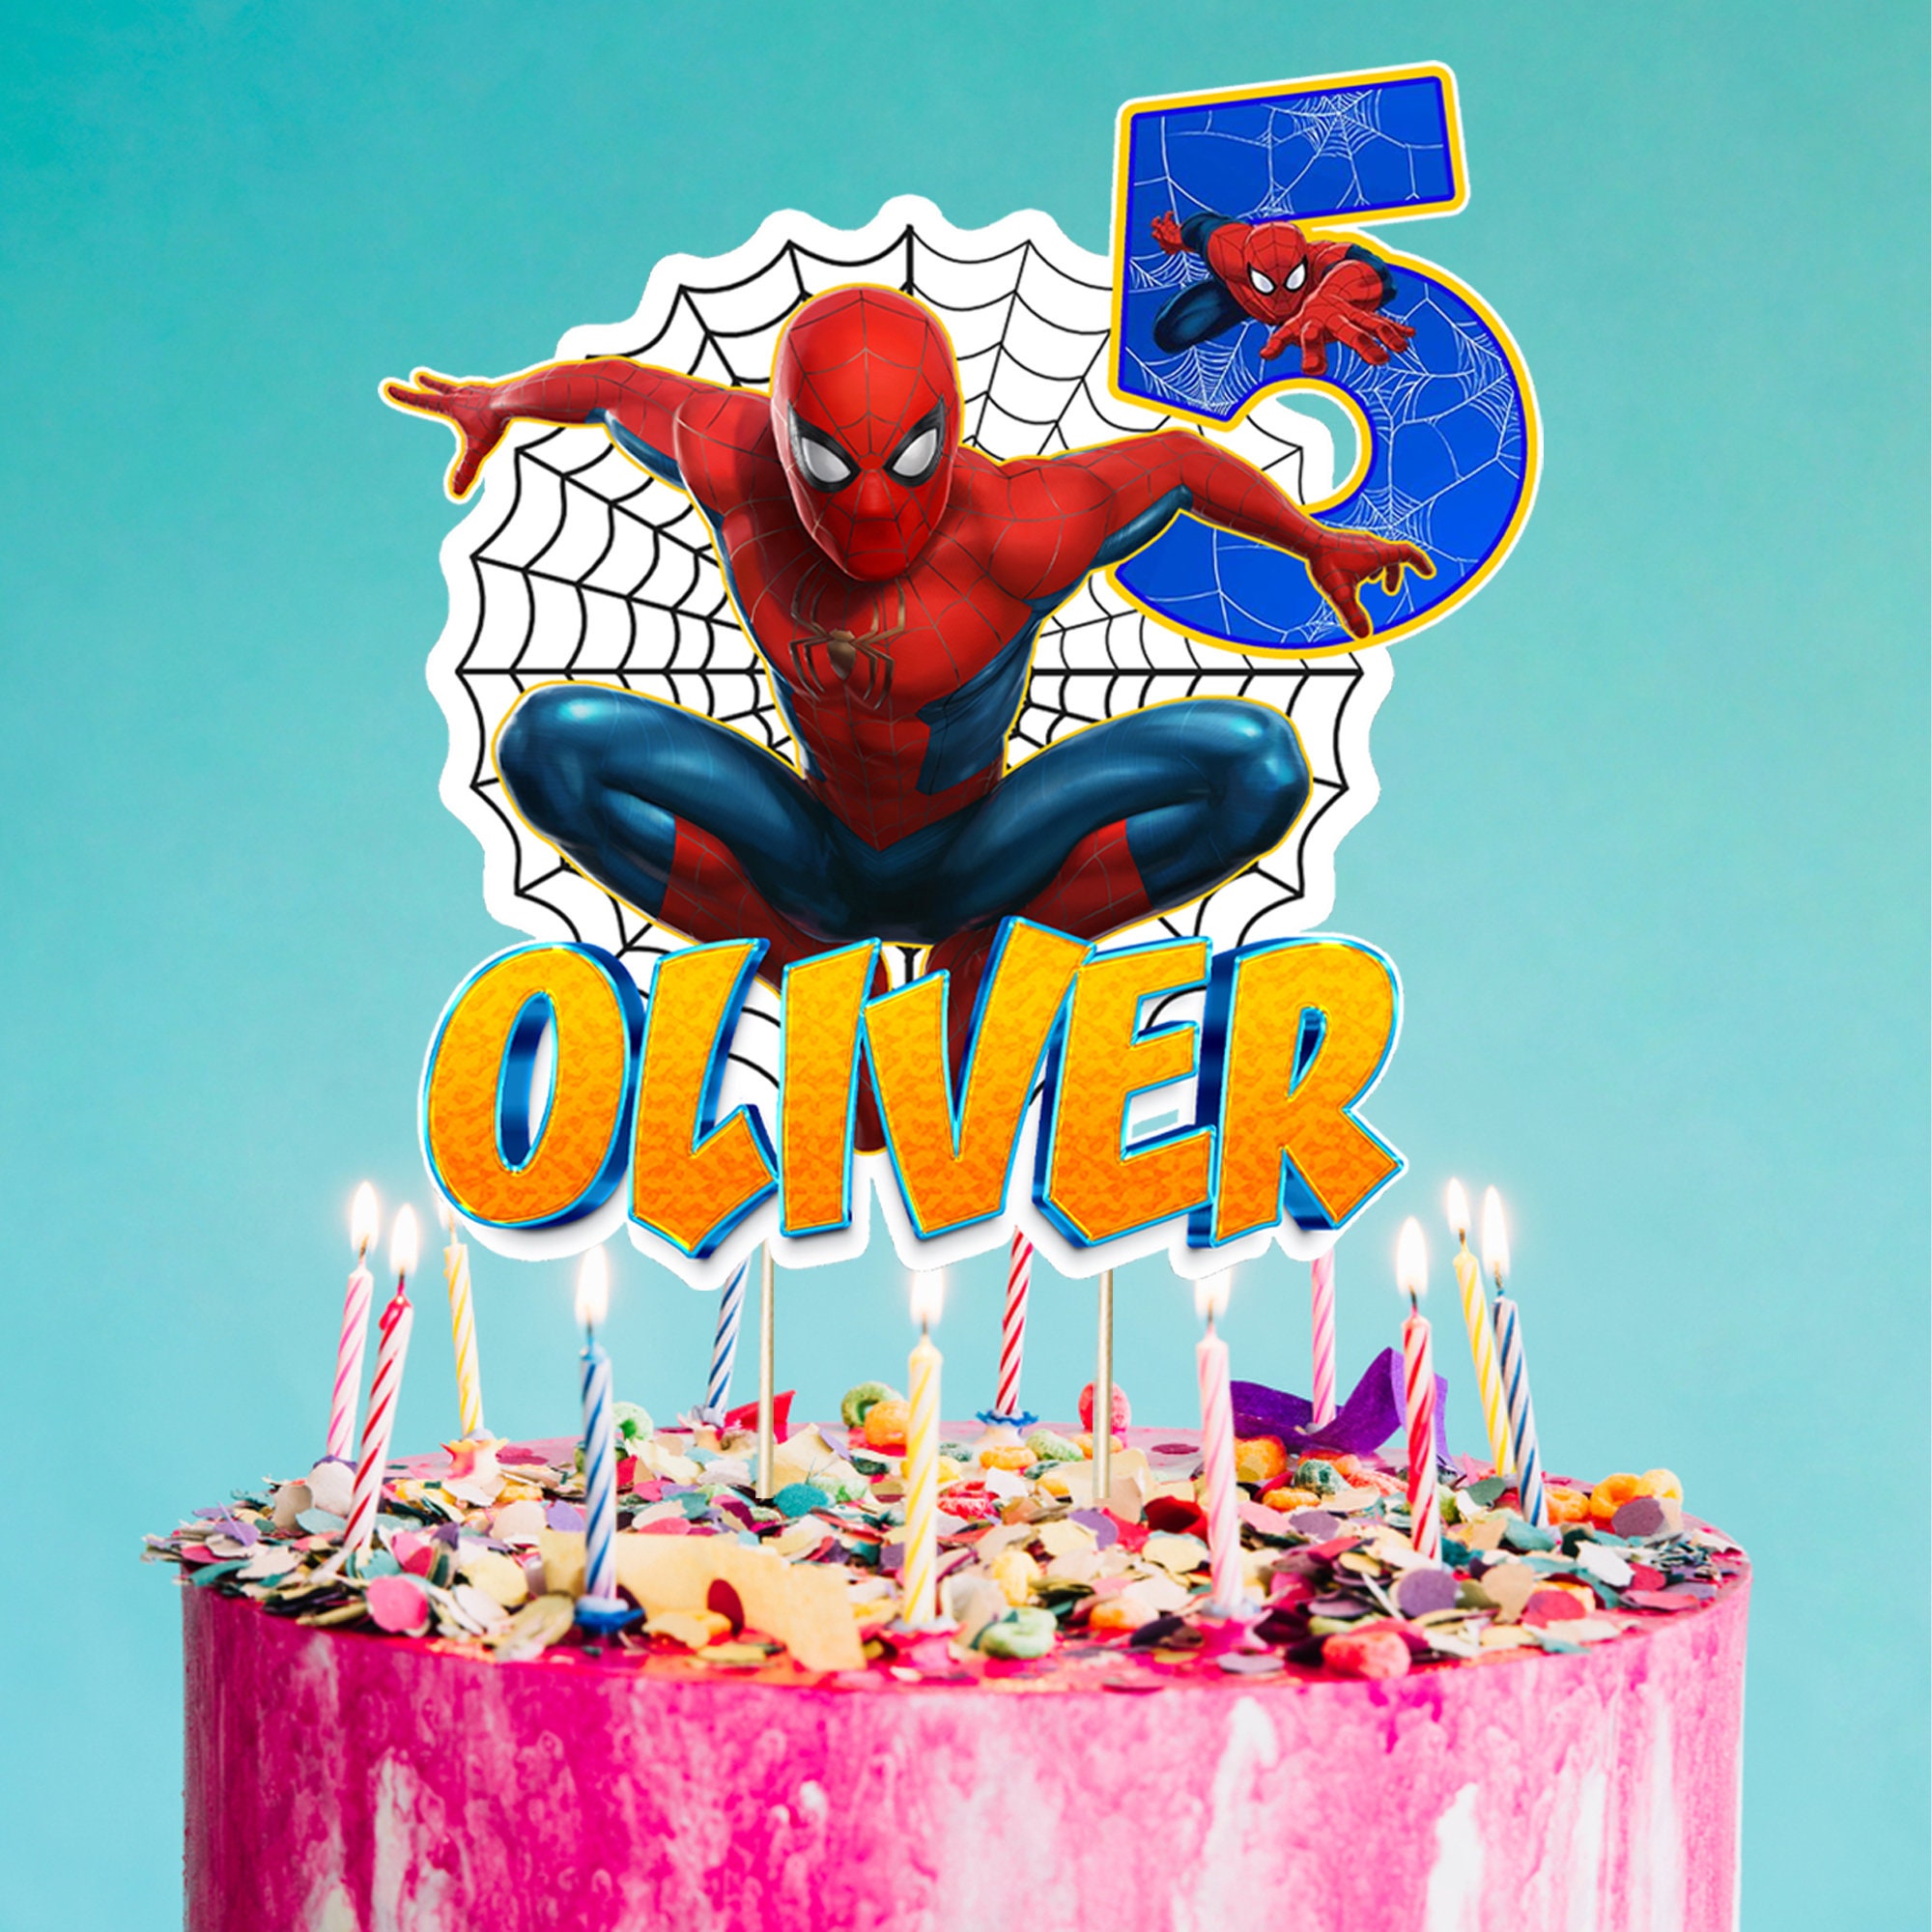 16+ Spiderman Cakes Pictures